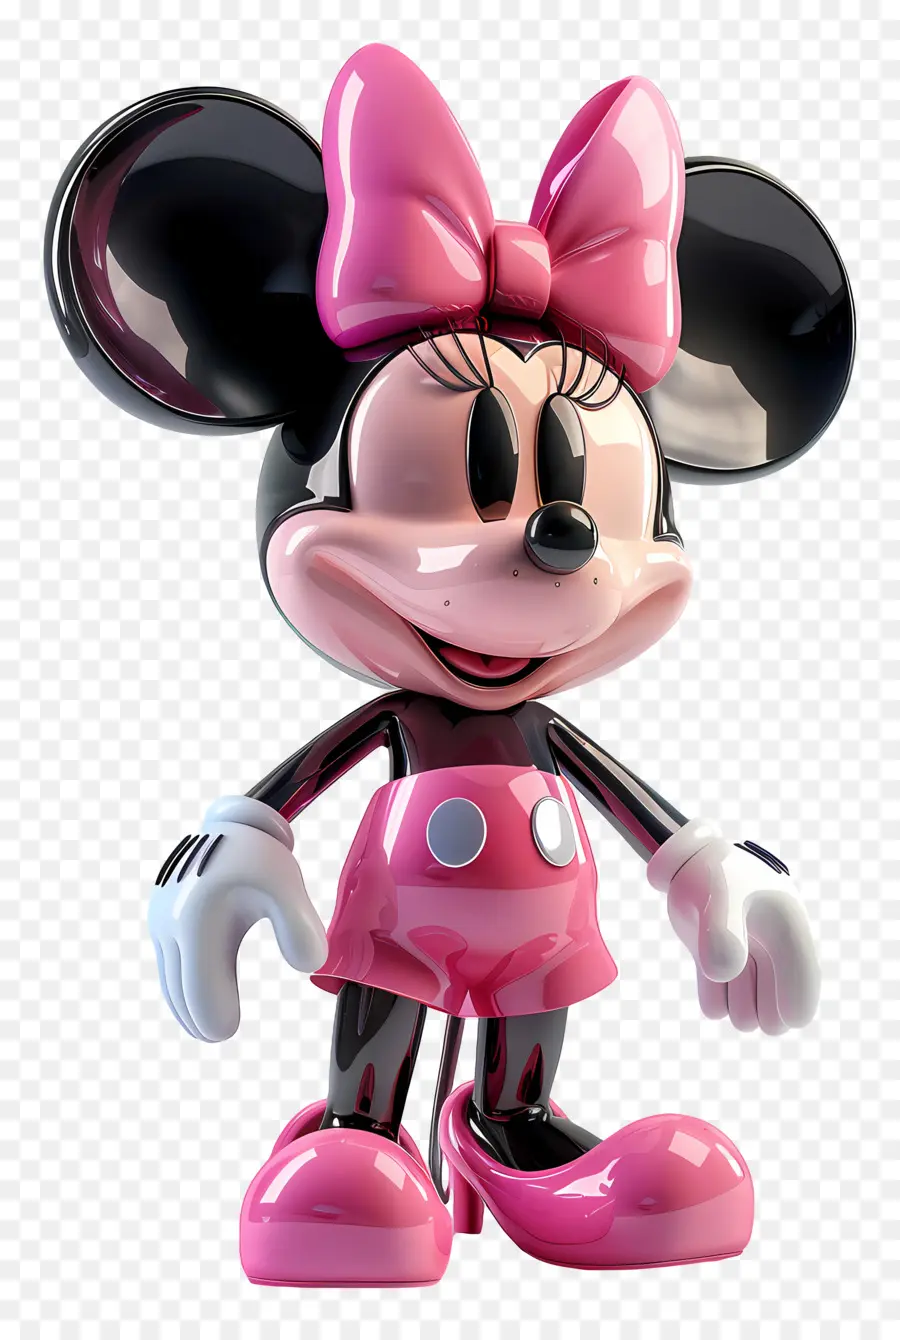 Mouse Minnie Rosa，Minnie Mouse PNG